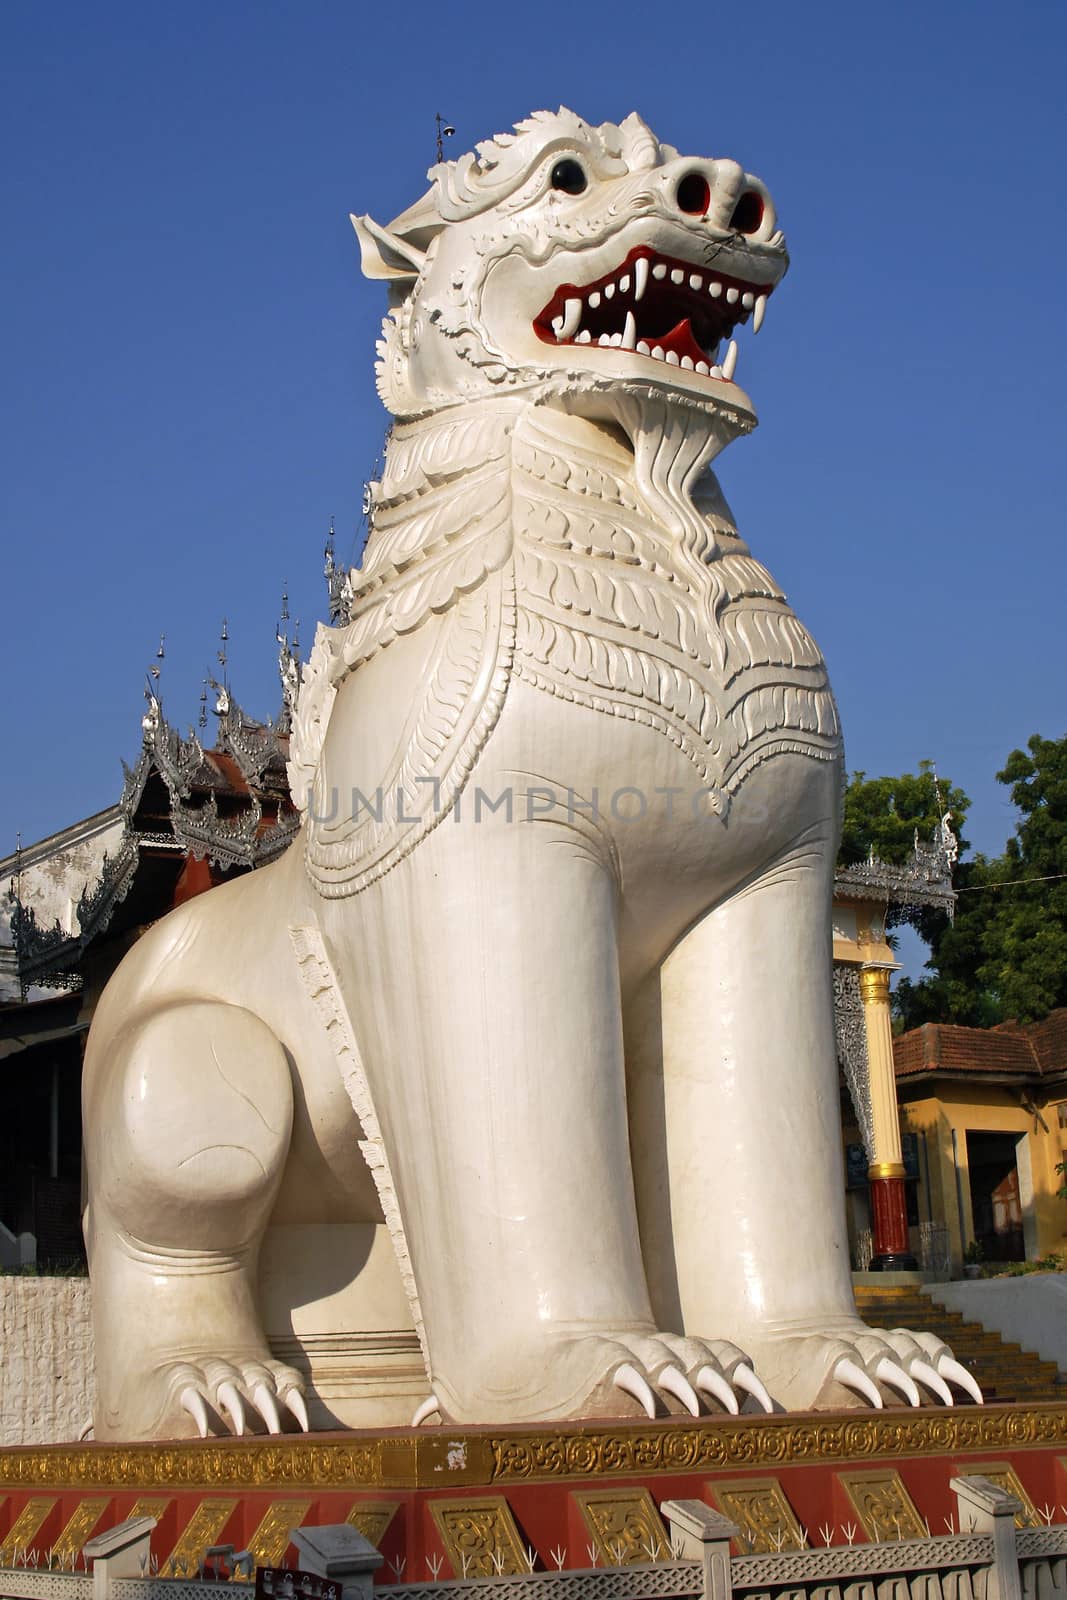 The beautiful chinthes are the guards of the Mandalay Hill. Photo was taken in Mandalay, Myanmar.